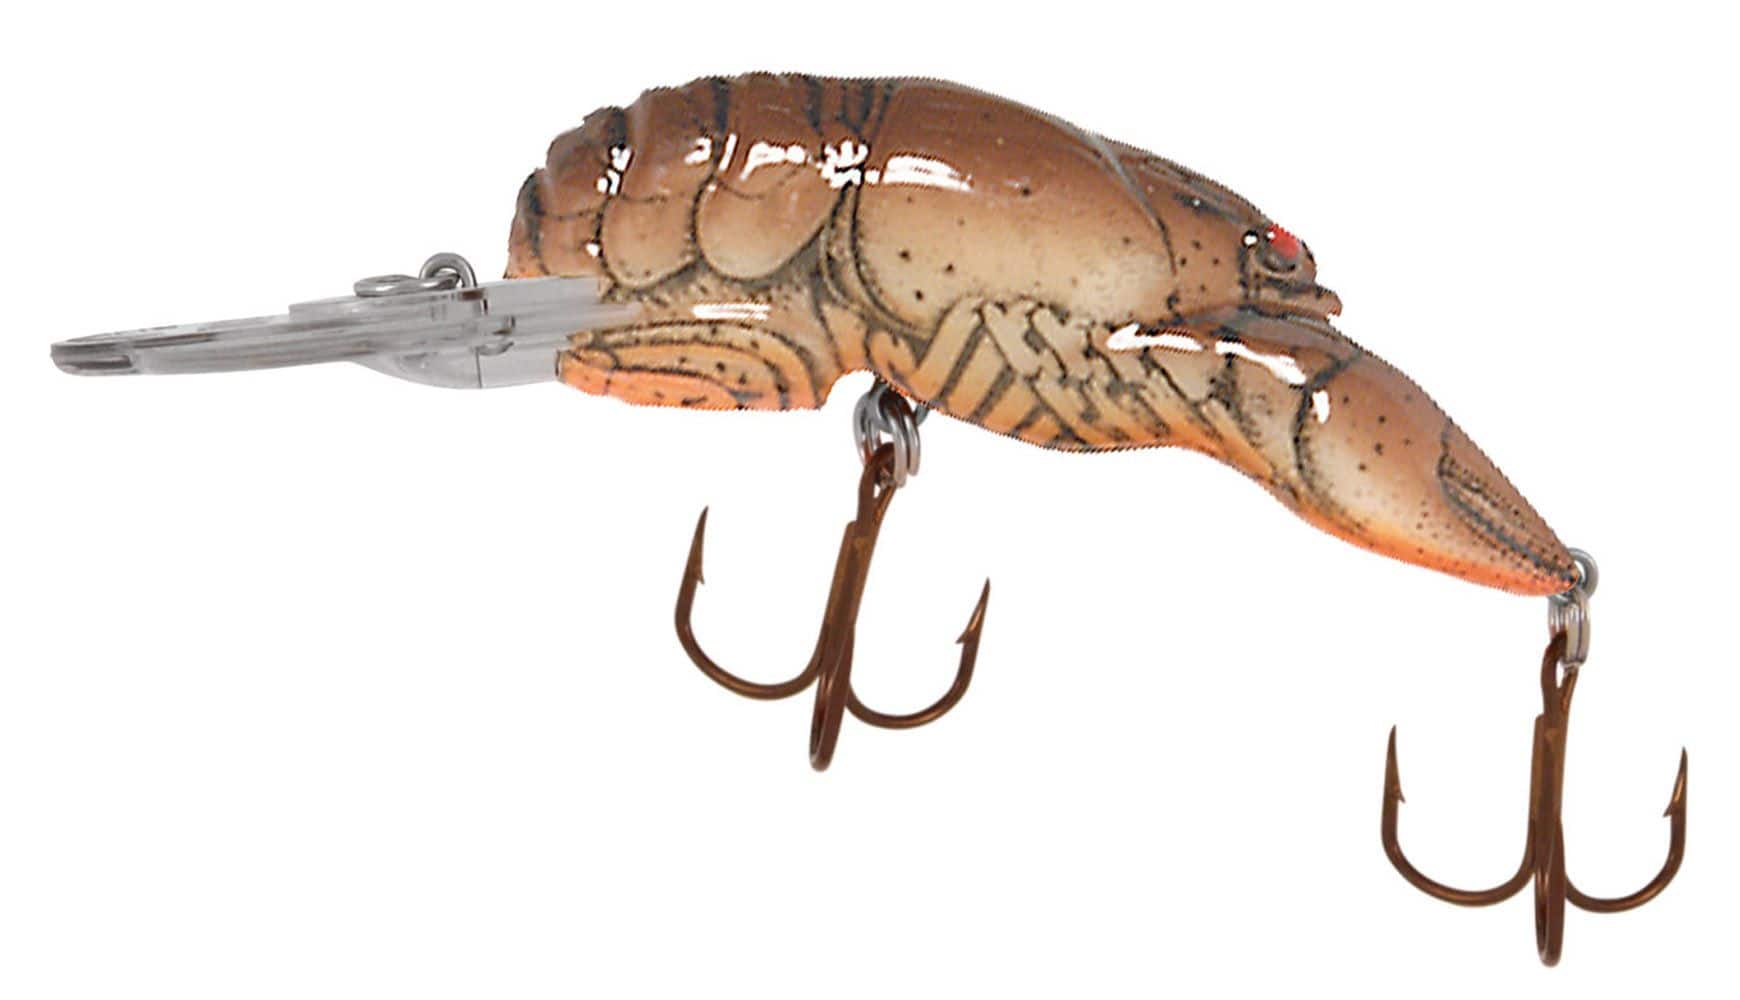 https://media-www.canadiantire.ca/product/playing/fishing/fishing-lures/0782839/rebel-big-craw-brown-crawfish-2-5--f25a5a3f-f952-412a-b0f2-abf3896d1a6a-jpgrendition.jpg